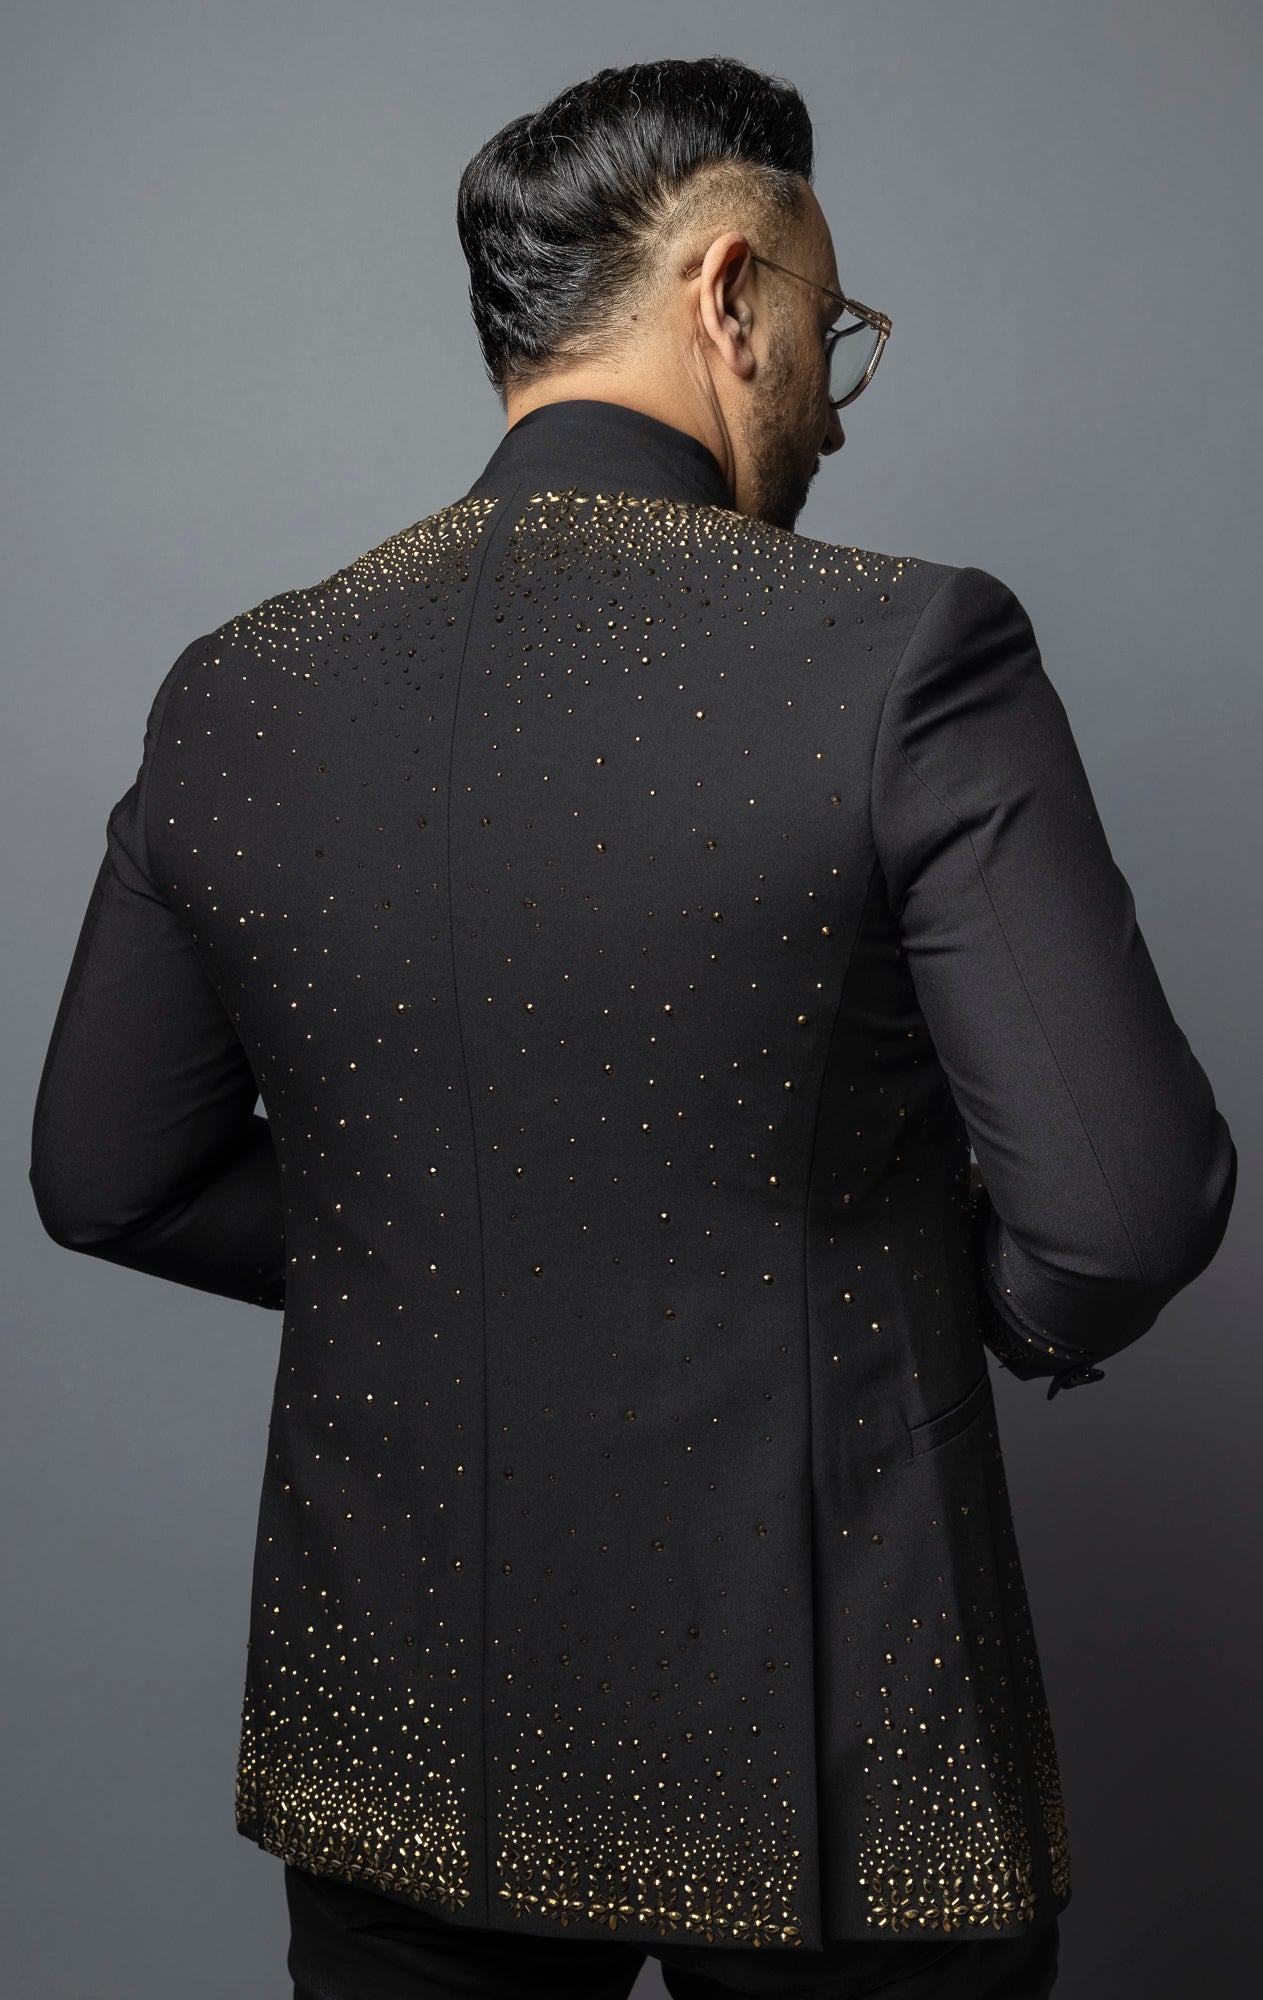 Black blazer featuring a solid color and striking gold rhinestone design, with a band collar